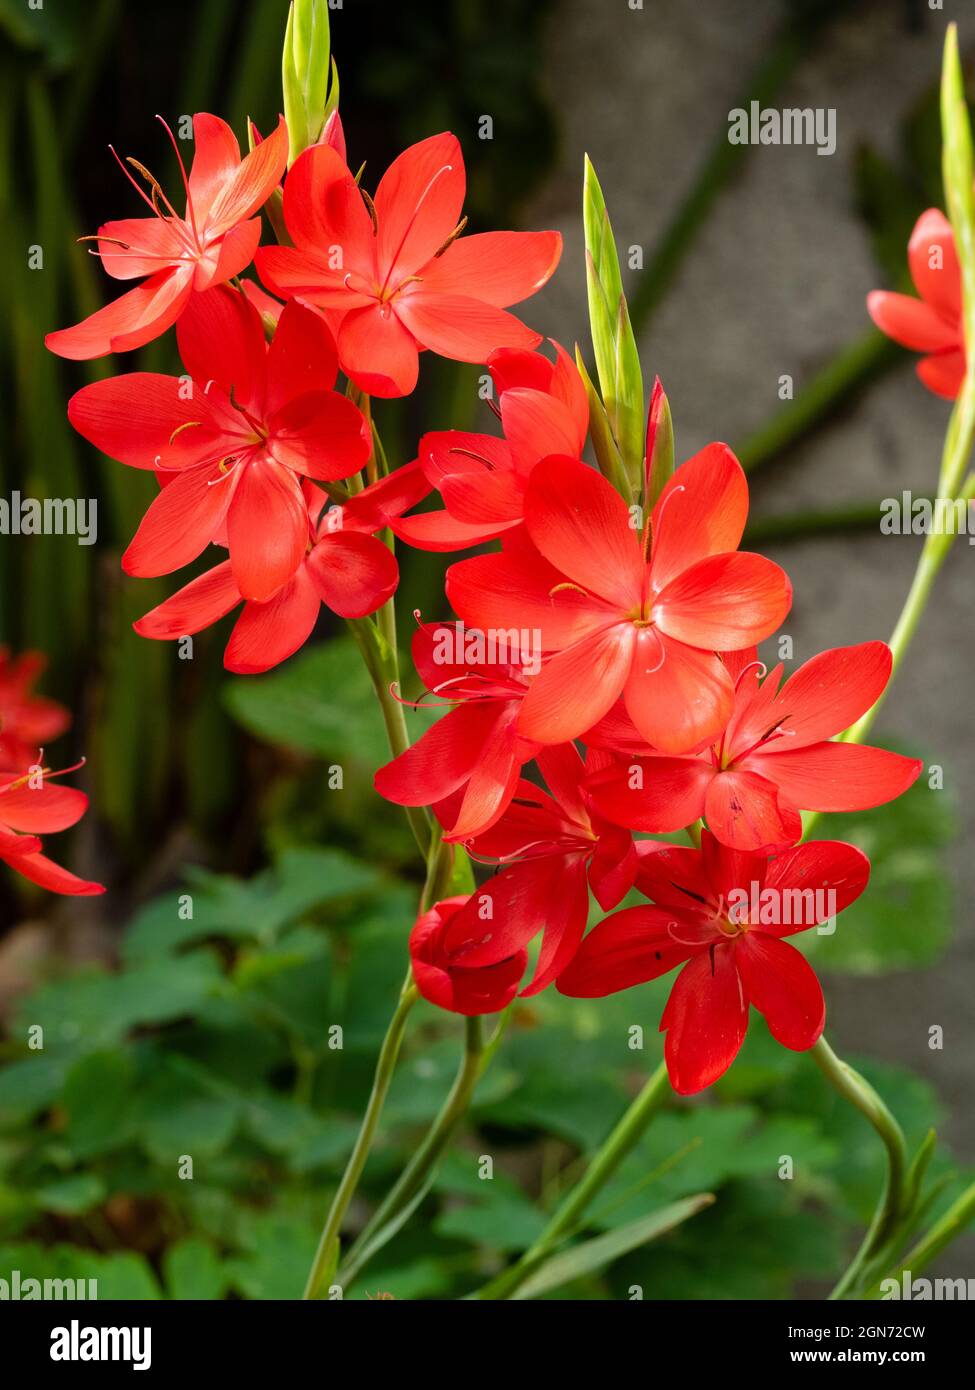 Bright red flowers of the autumn blooming Kaffir Lily, Hesperantha coccinea 'Major' Stock Photo